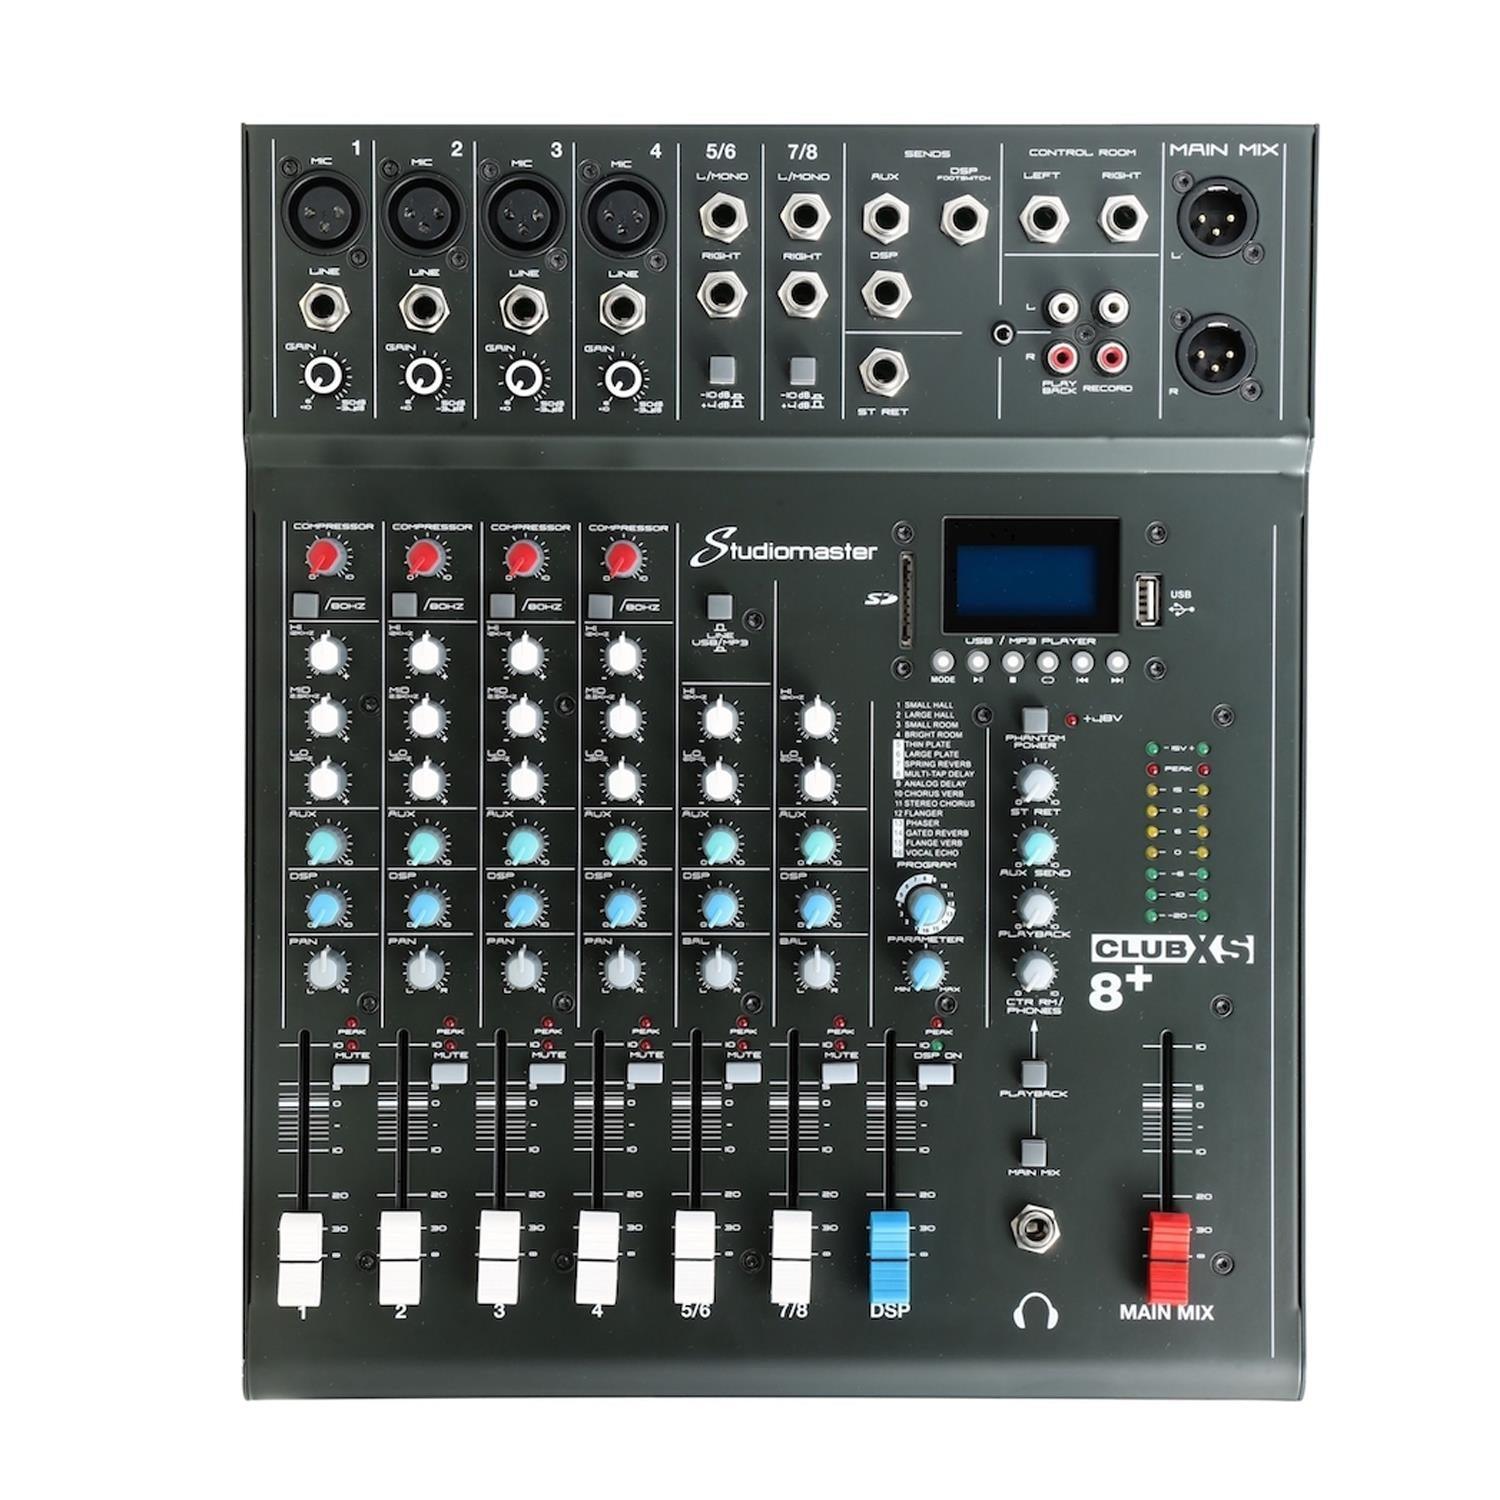 Studiomaster CLub XS 8+ 6 Channel Mixing Desk - DY Pro Audio